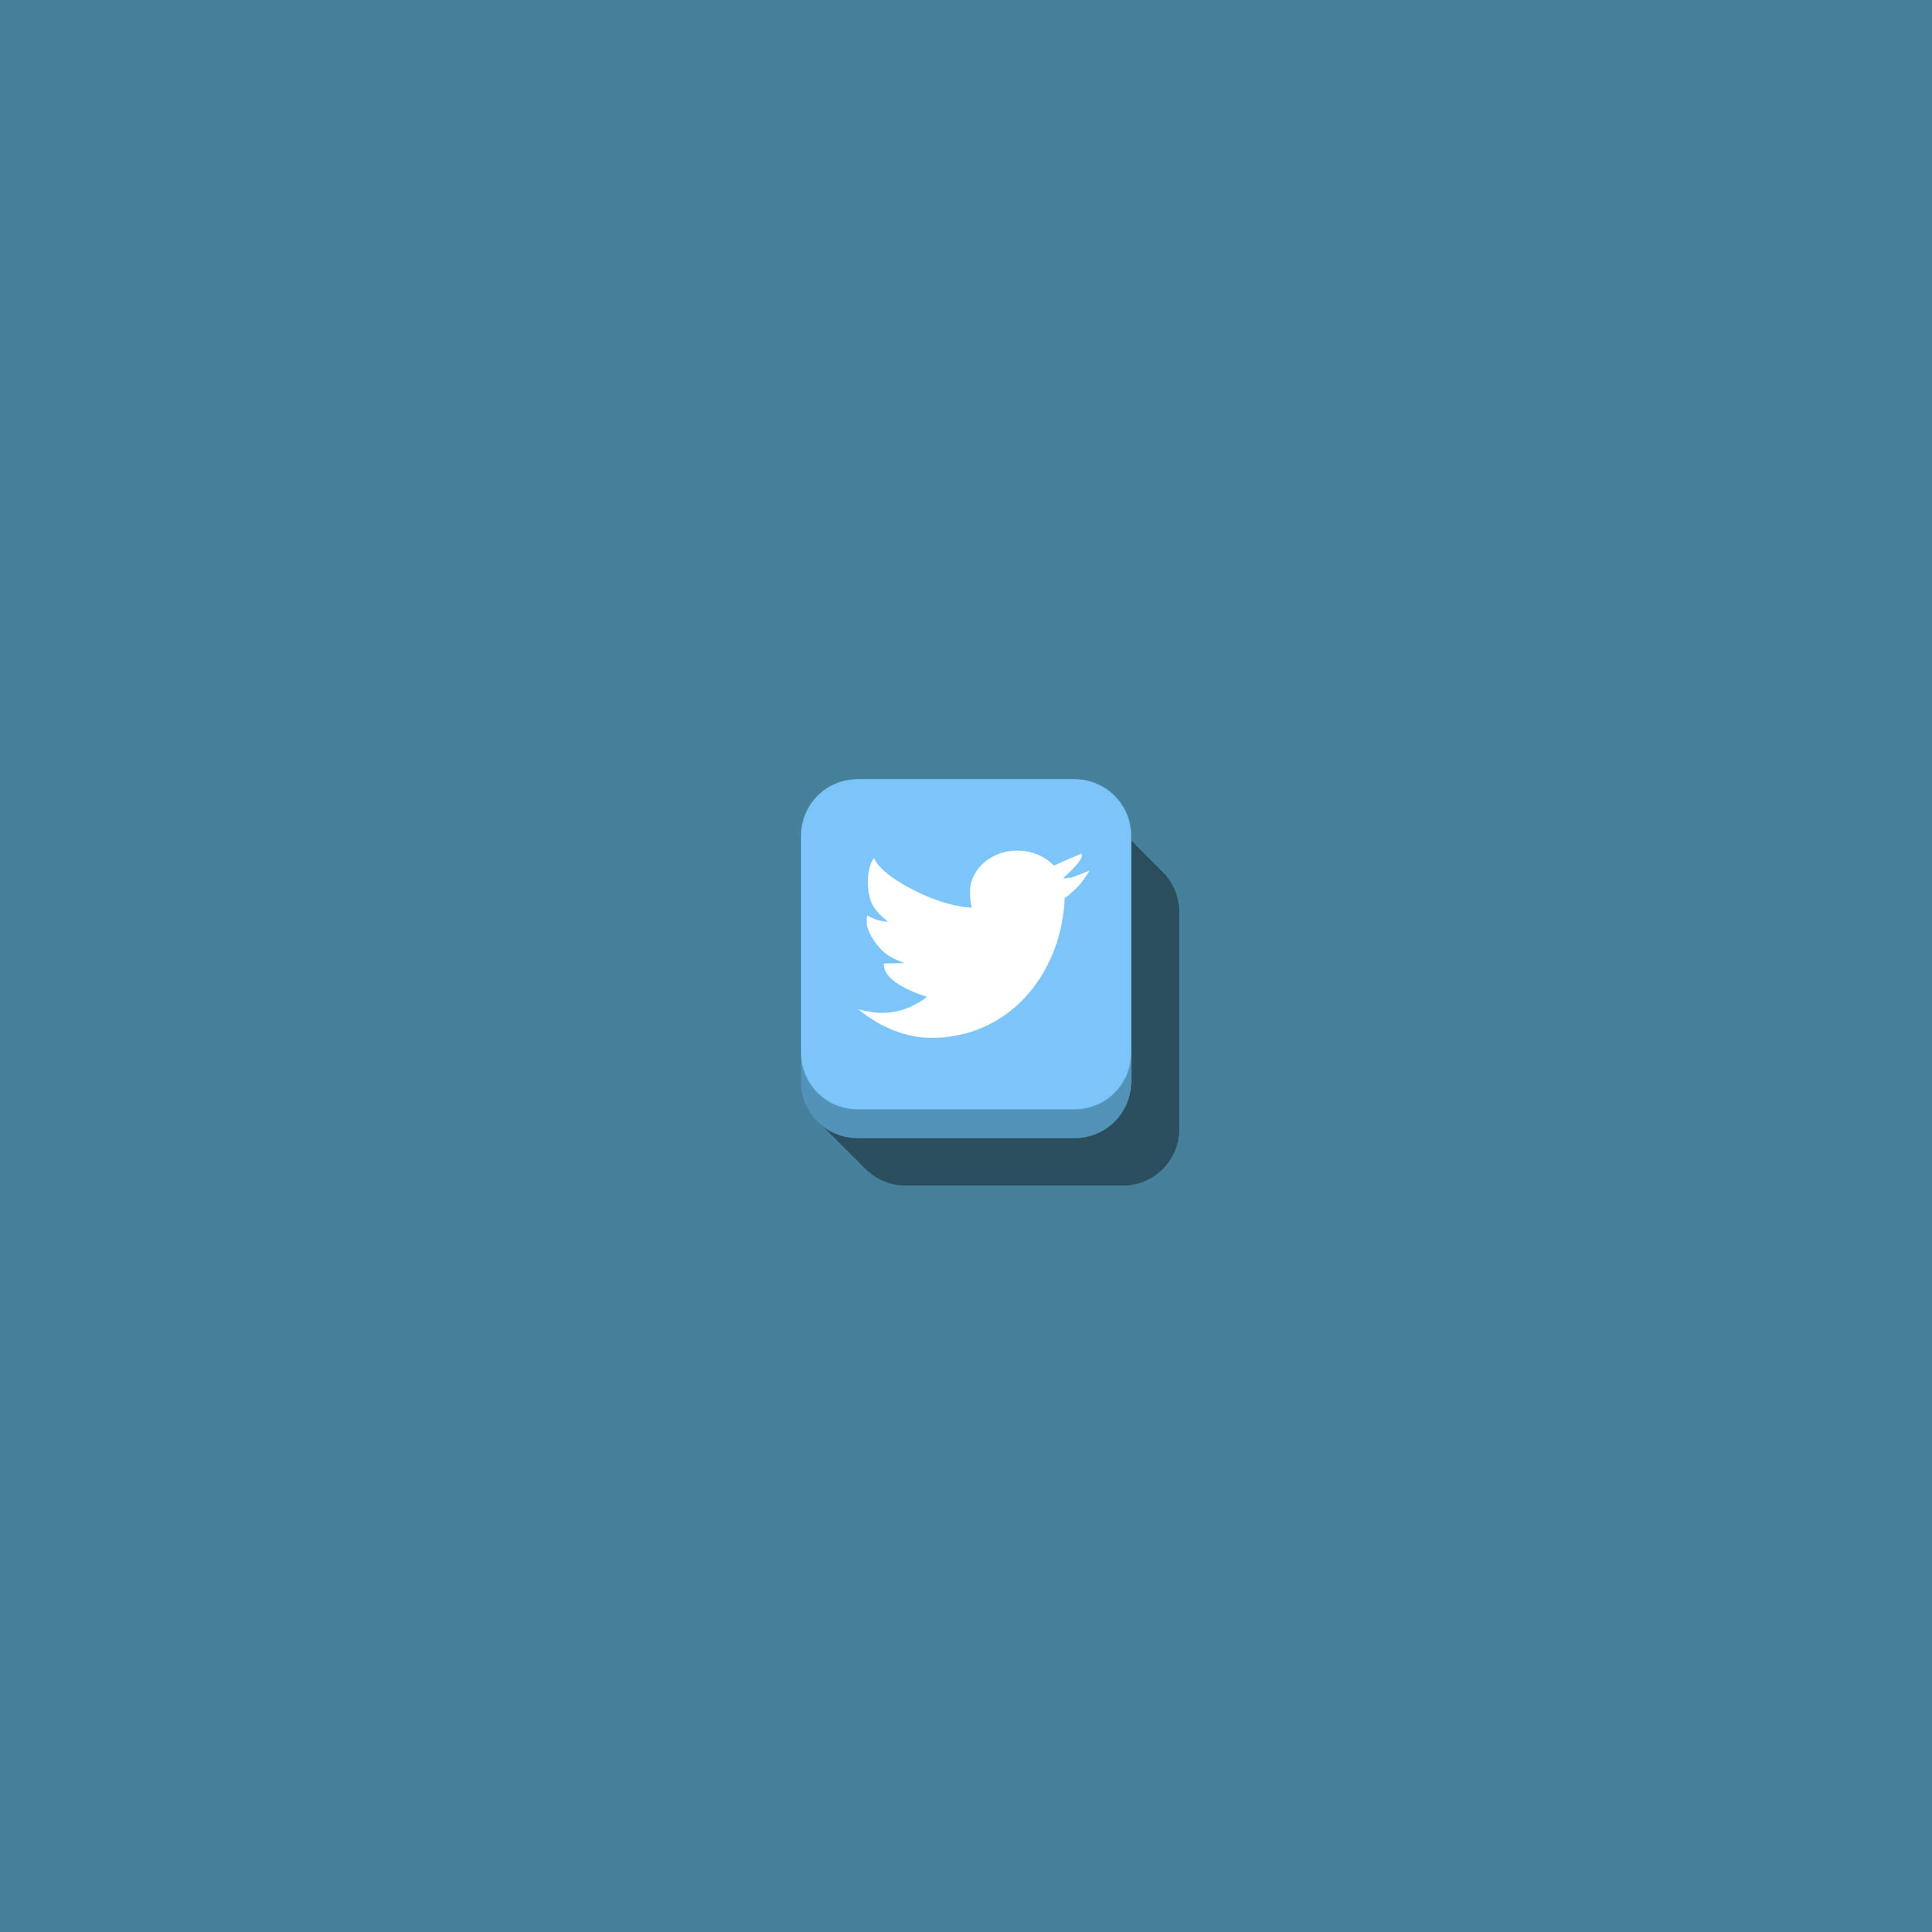 Twitter: Twitter logo with blue background.